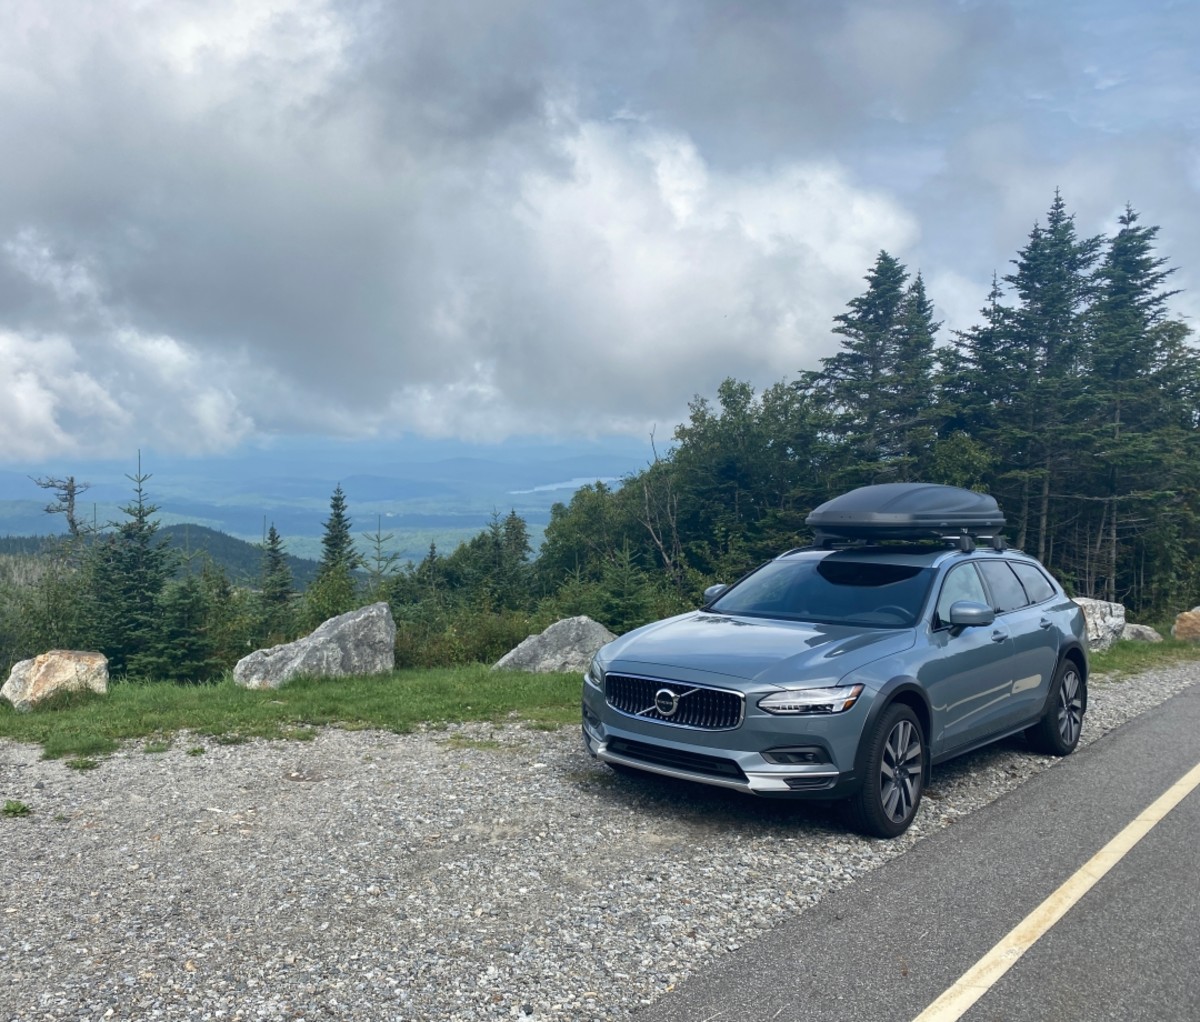 2021 Volvo V90 Cross Country parked beside a mountain road